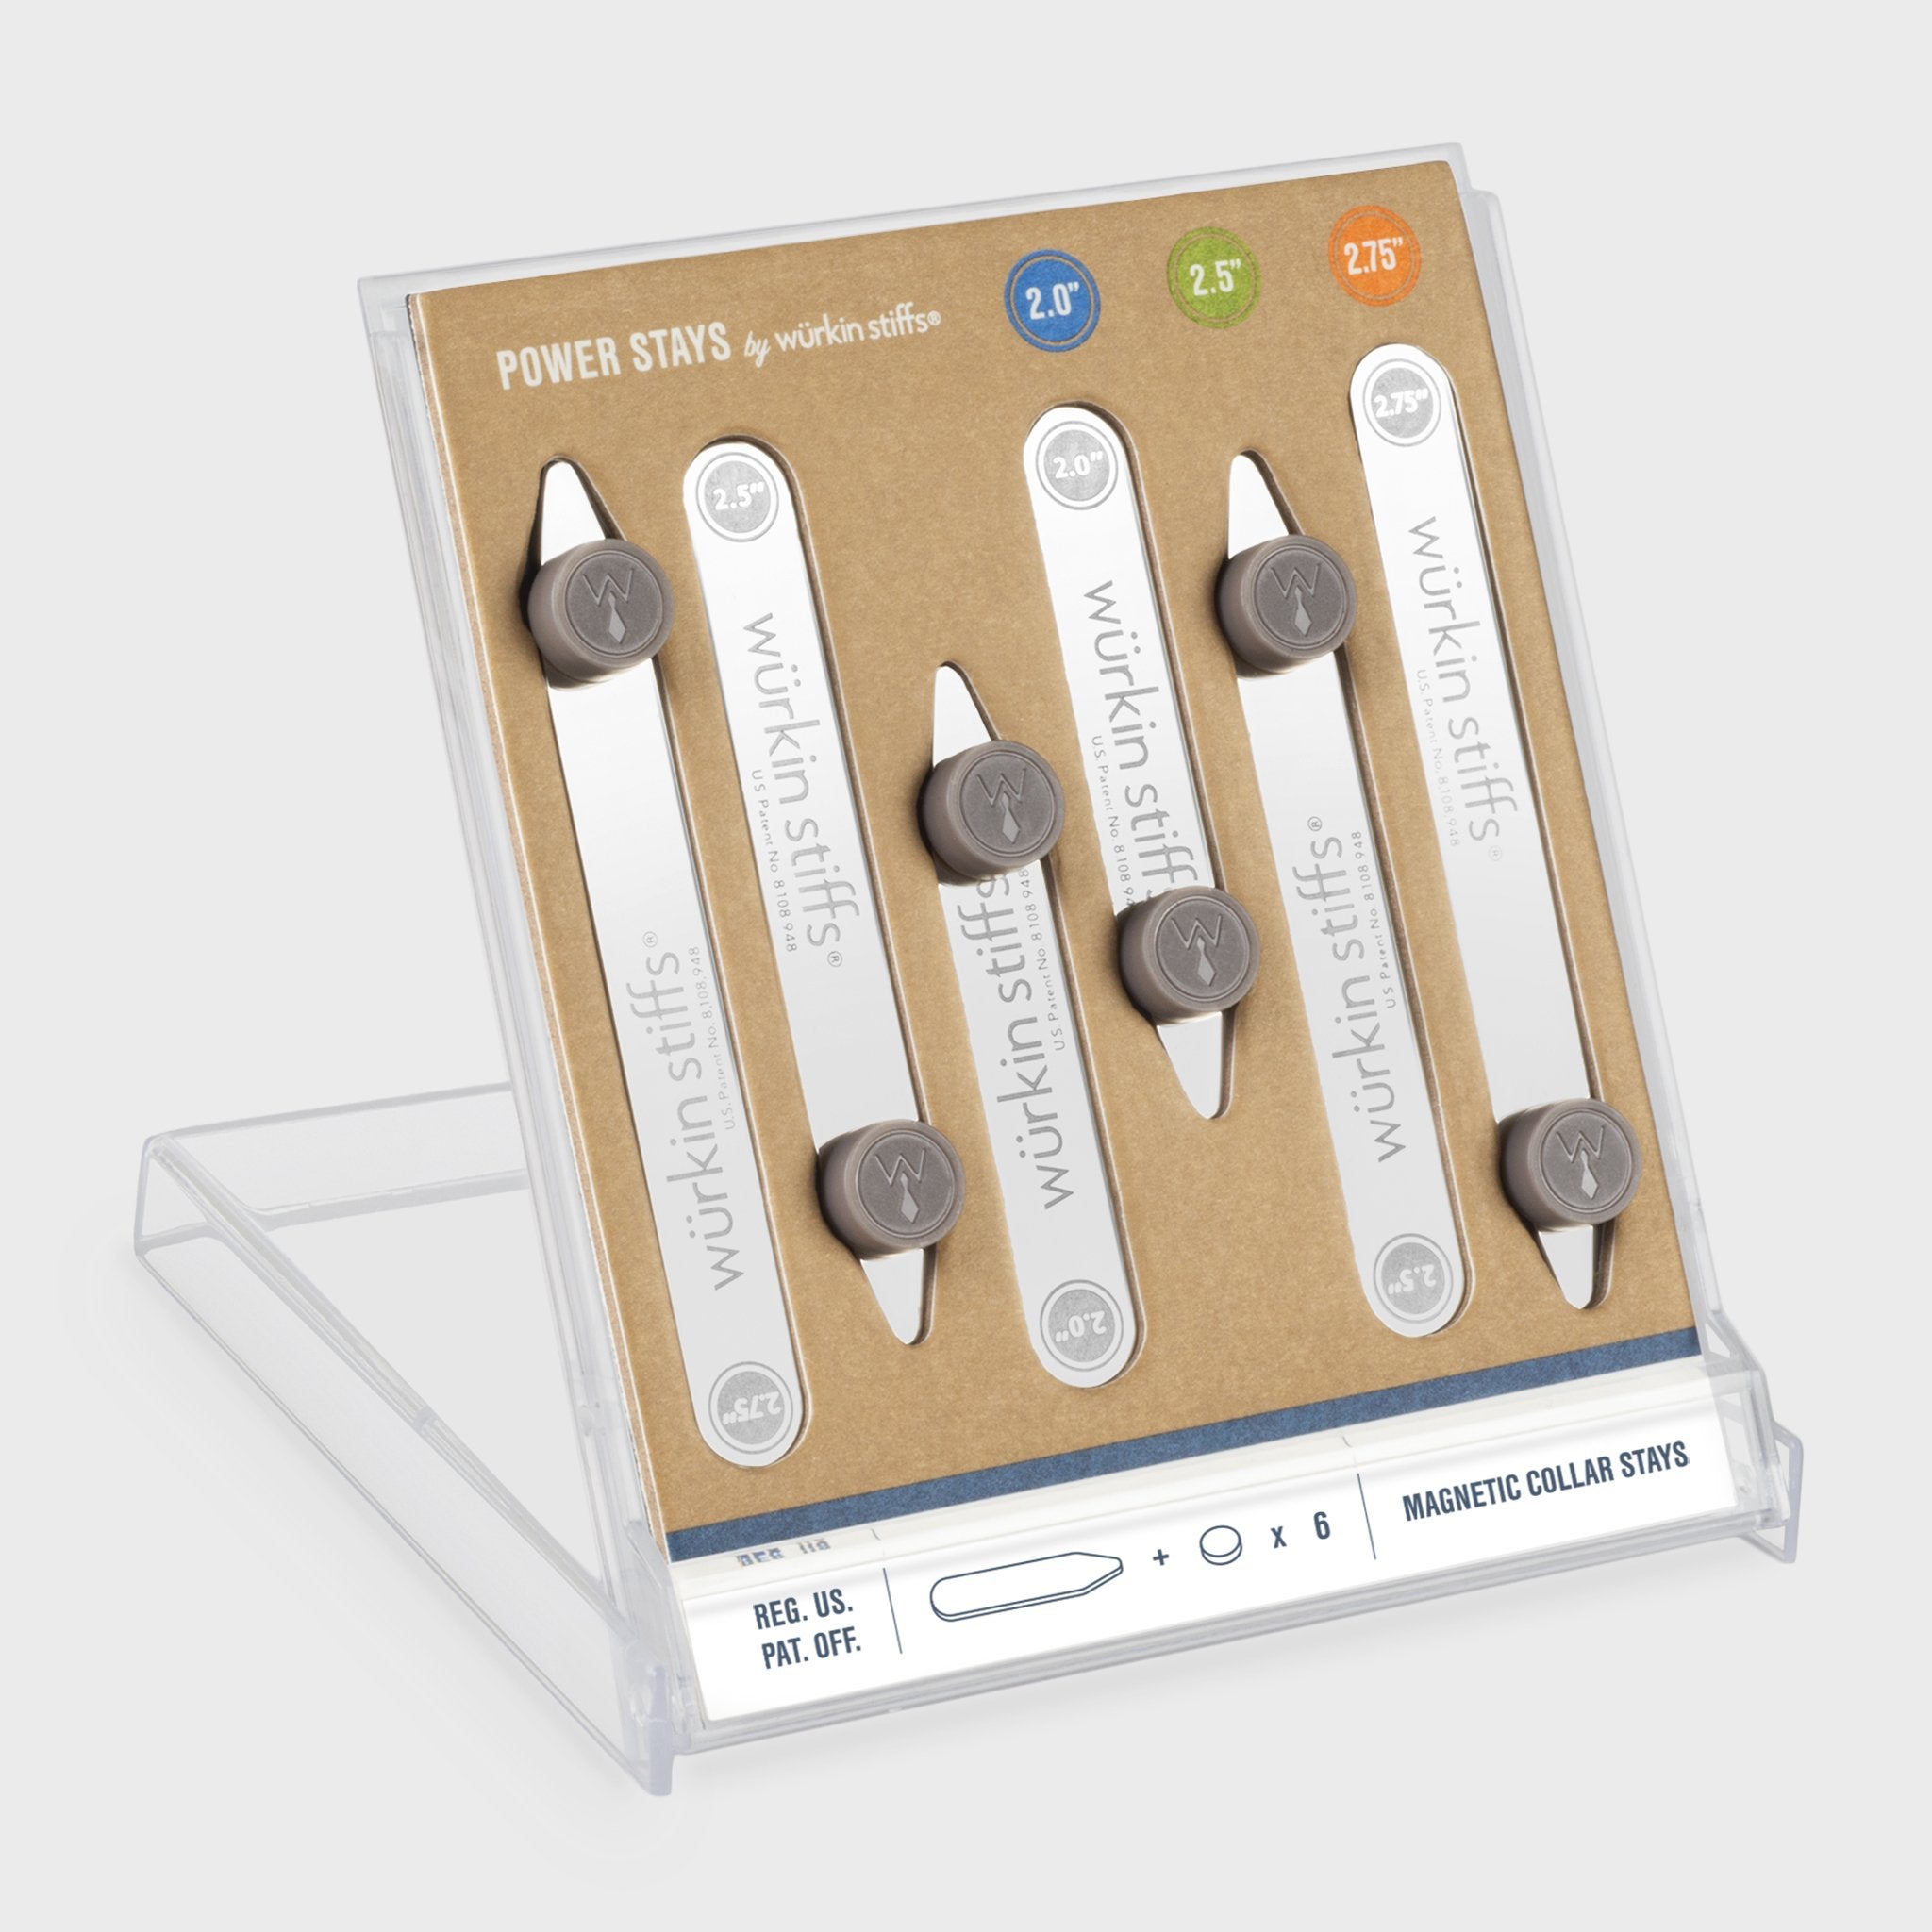 Wurkin Stiffs Magnetic Collar Stays come with tiny magnets to not